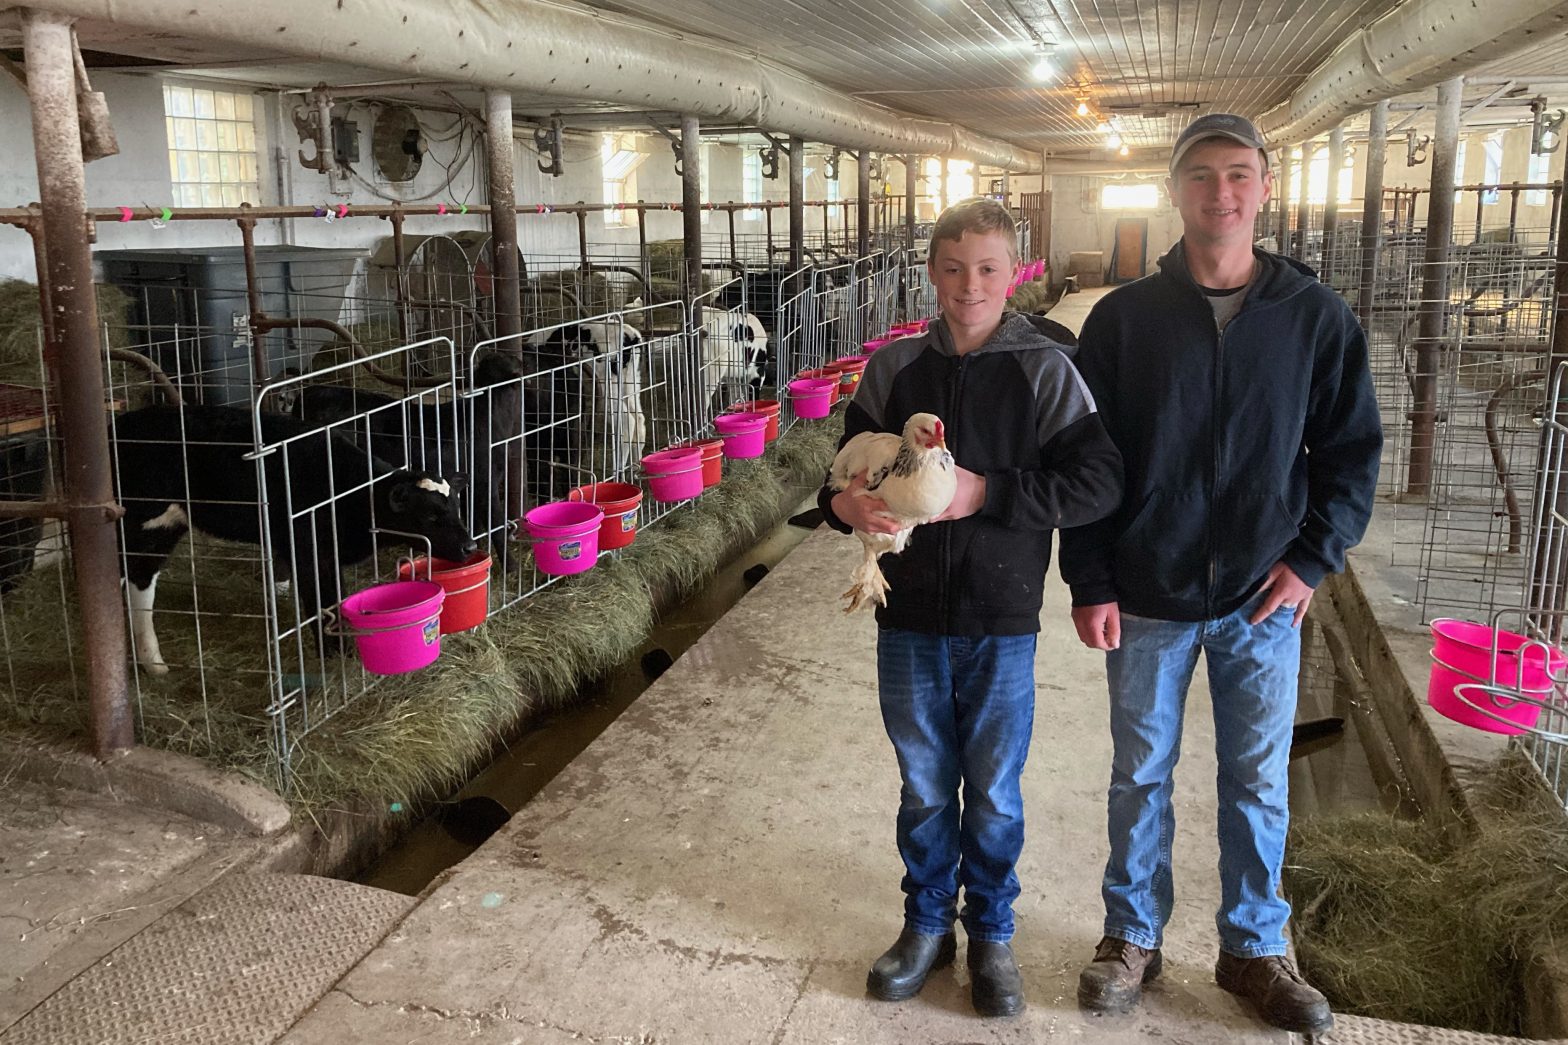 Brothers Nathan and Anthony Kuehl discovered a love for farming when they started raising feeder calves to have something to do during the COVID pandemic and virtual school.  Now they say they’ll continue their entrepreneurial venture at Kuehl Family Farms in Cottage Grove, Wisconsin, even as their schedules return to normal.